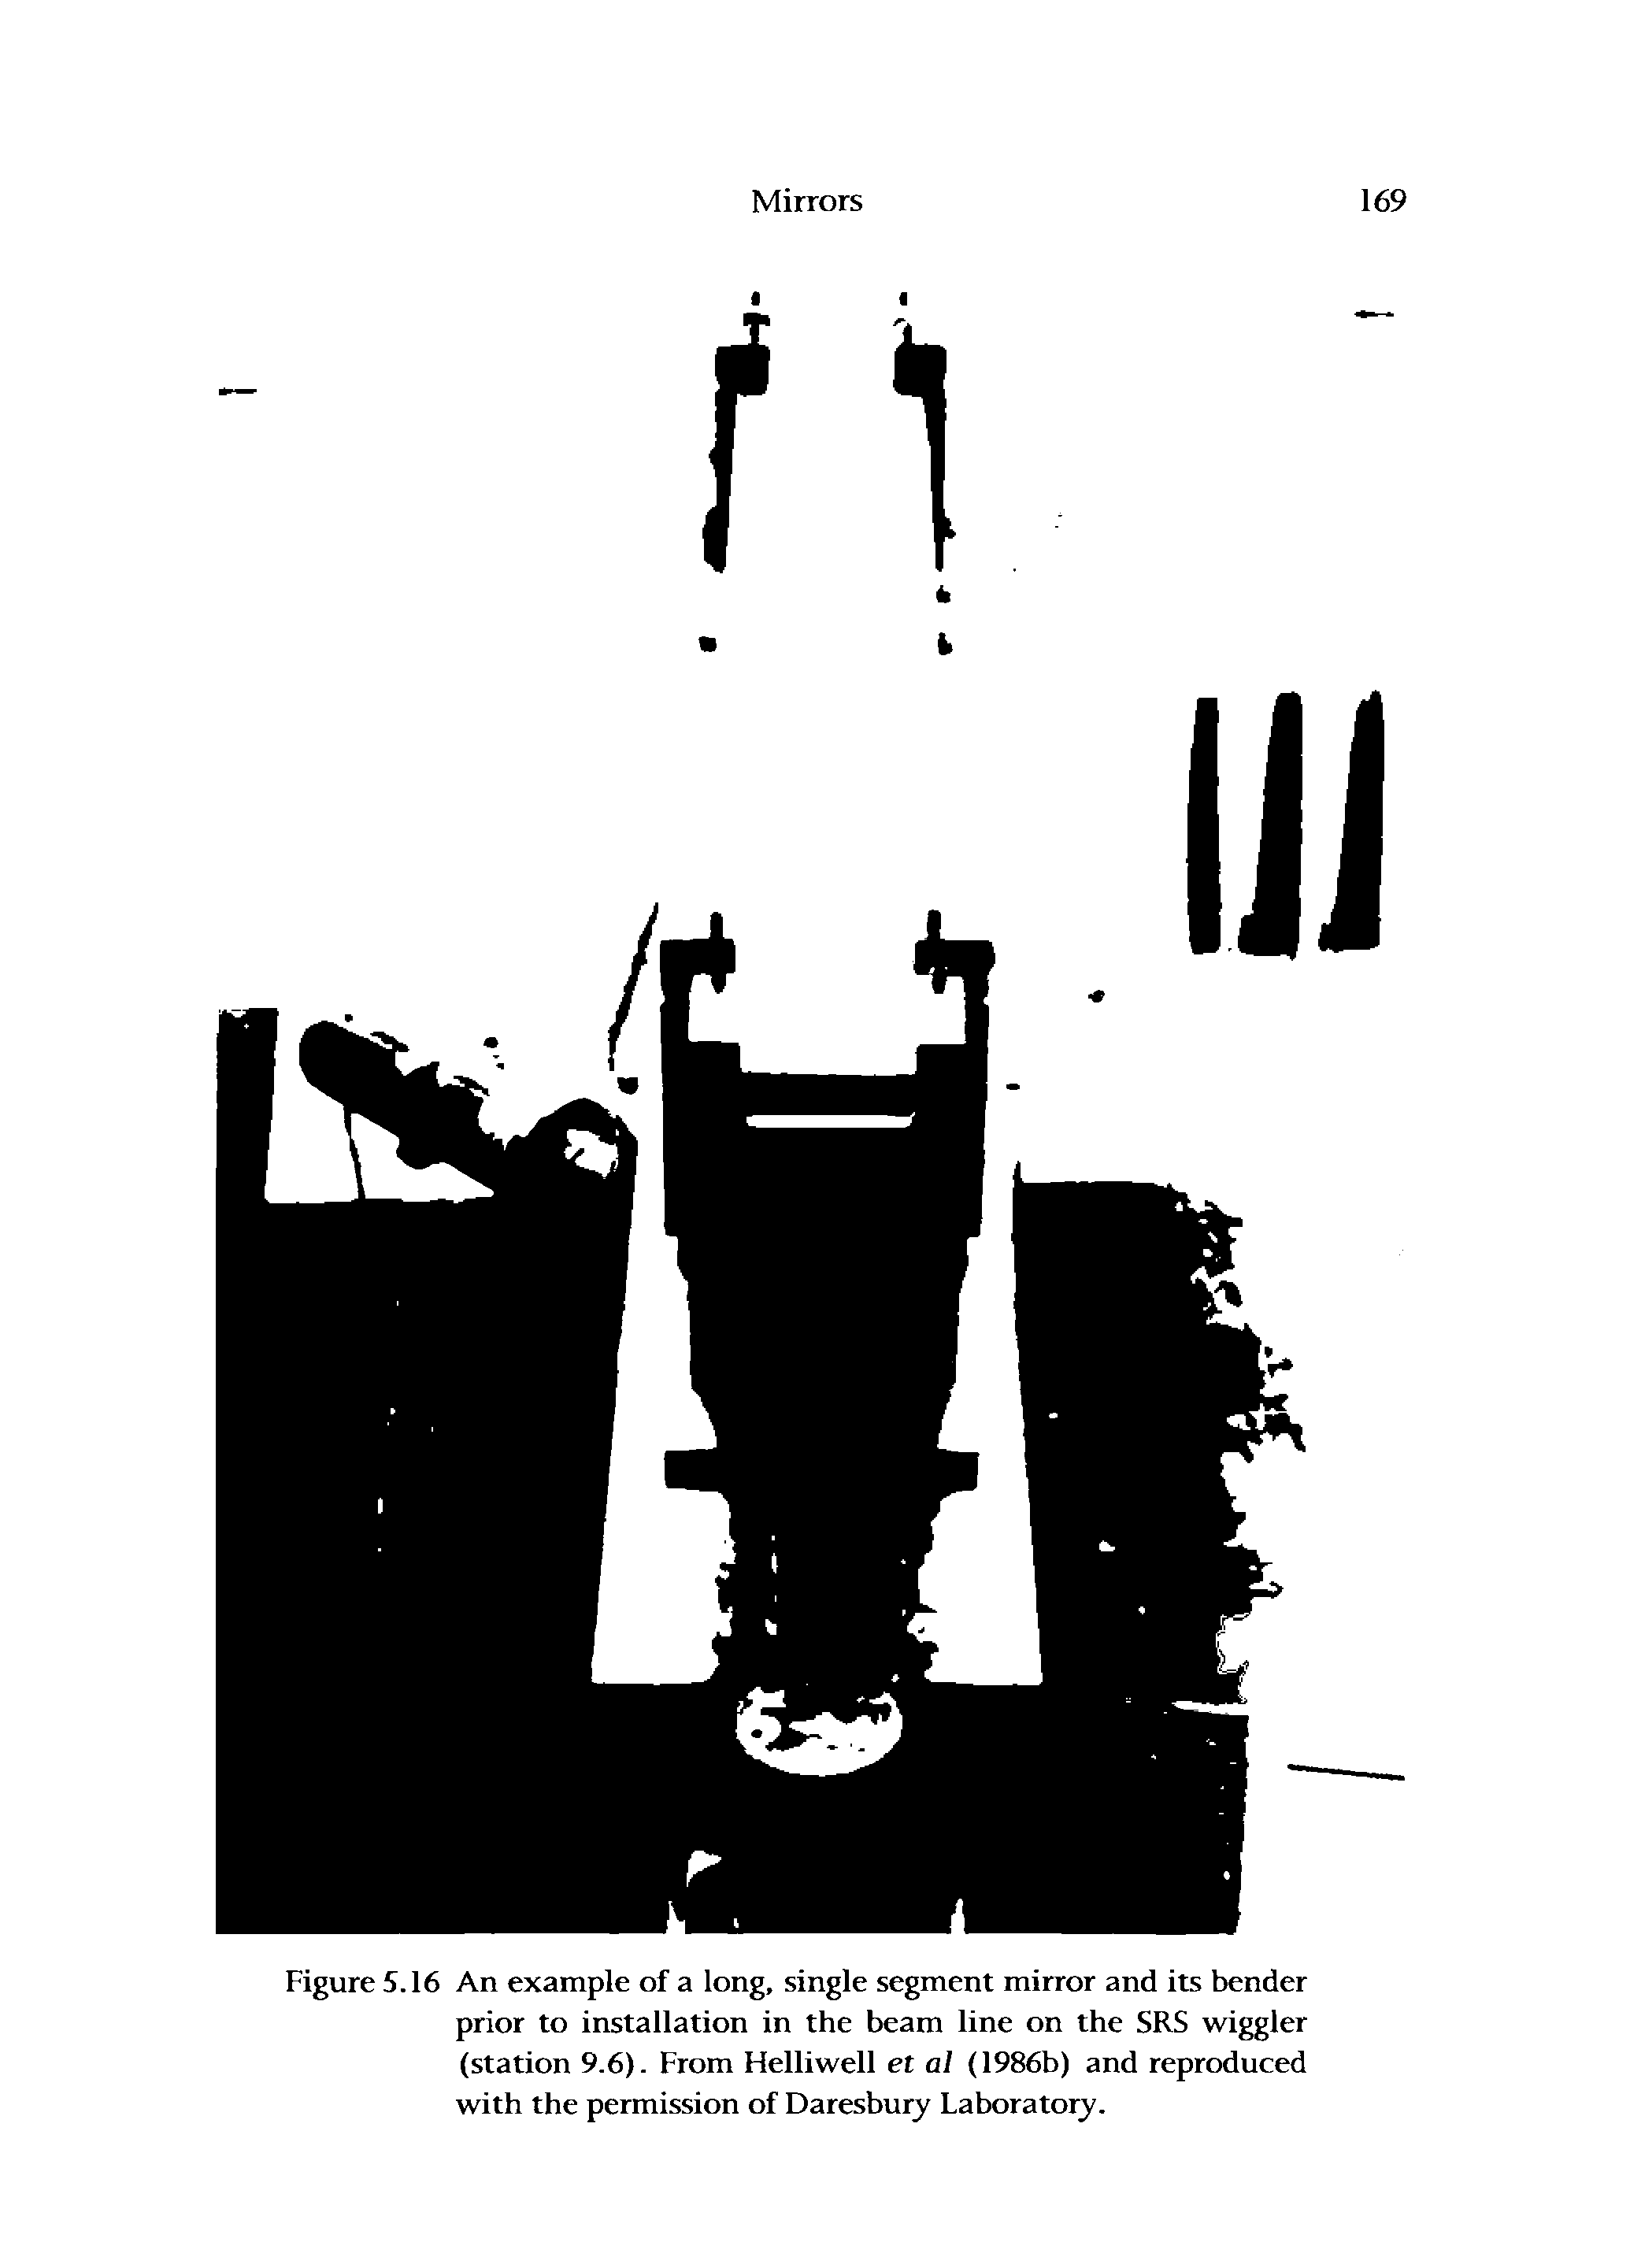 Figure 5.16 An example of a long, single segment mirror and its bender prior to installation in the beam line on the SRS wiggler (station 9.6). From Helliwell et al (1986b) and reproduced with the permission of Daresbury Laboratory.